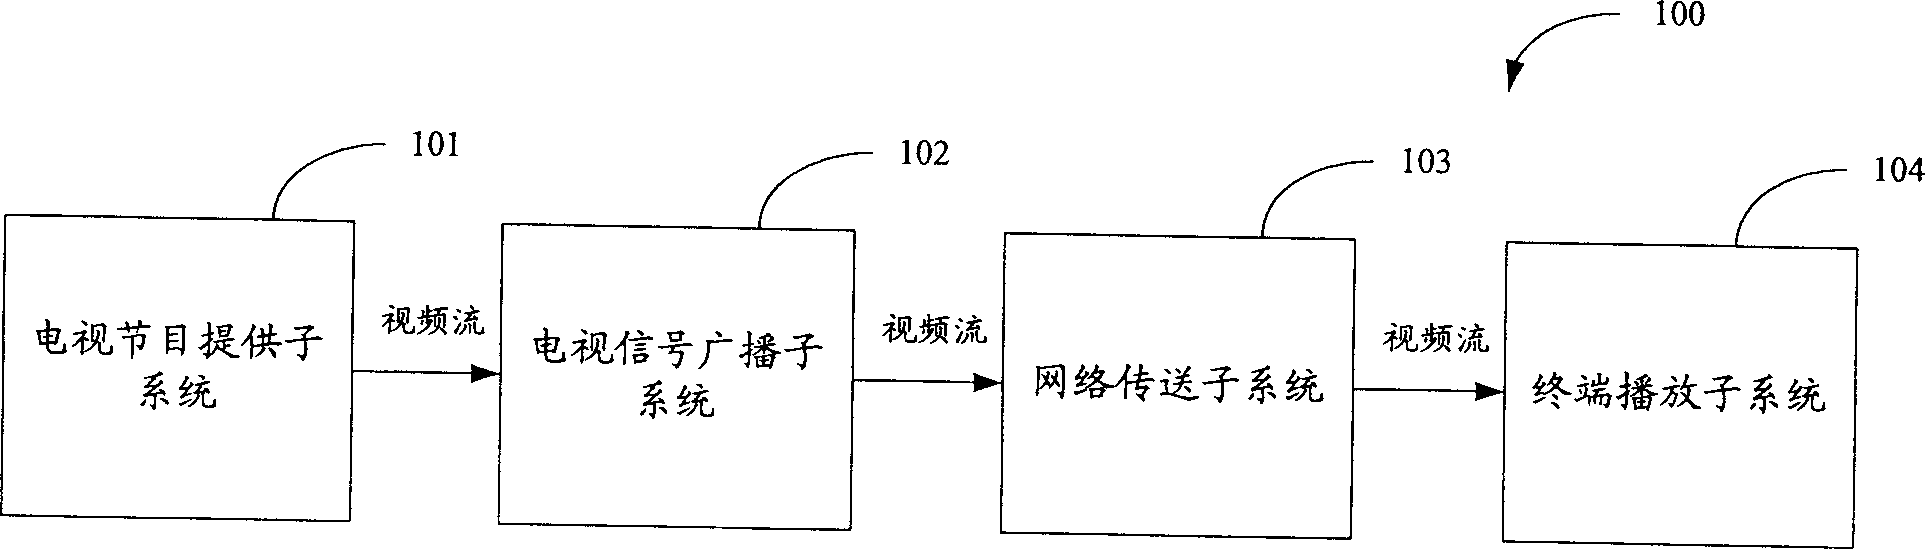 Safety certification device for digital TV signal, and TV equipment with the device